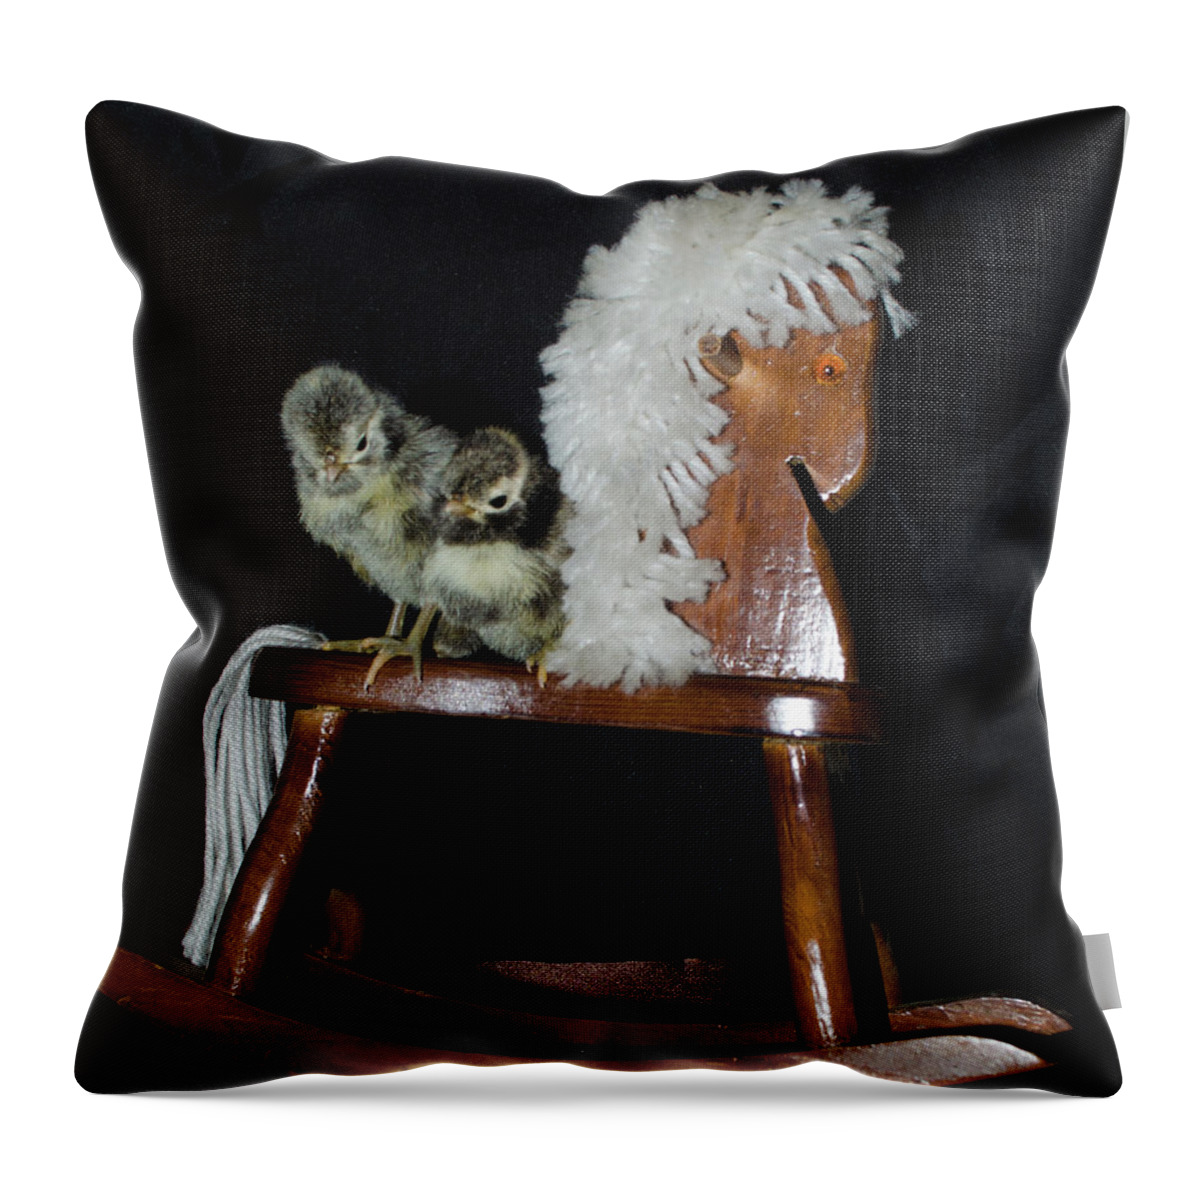 Bird Throw Pillow featuring the photograph Double Seat Rocking Horse by Donna Brown